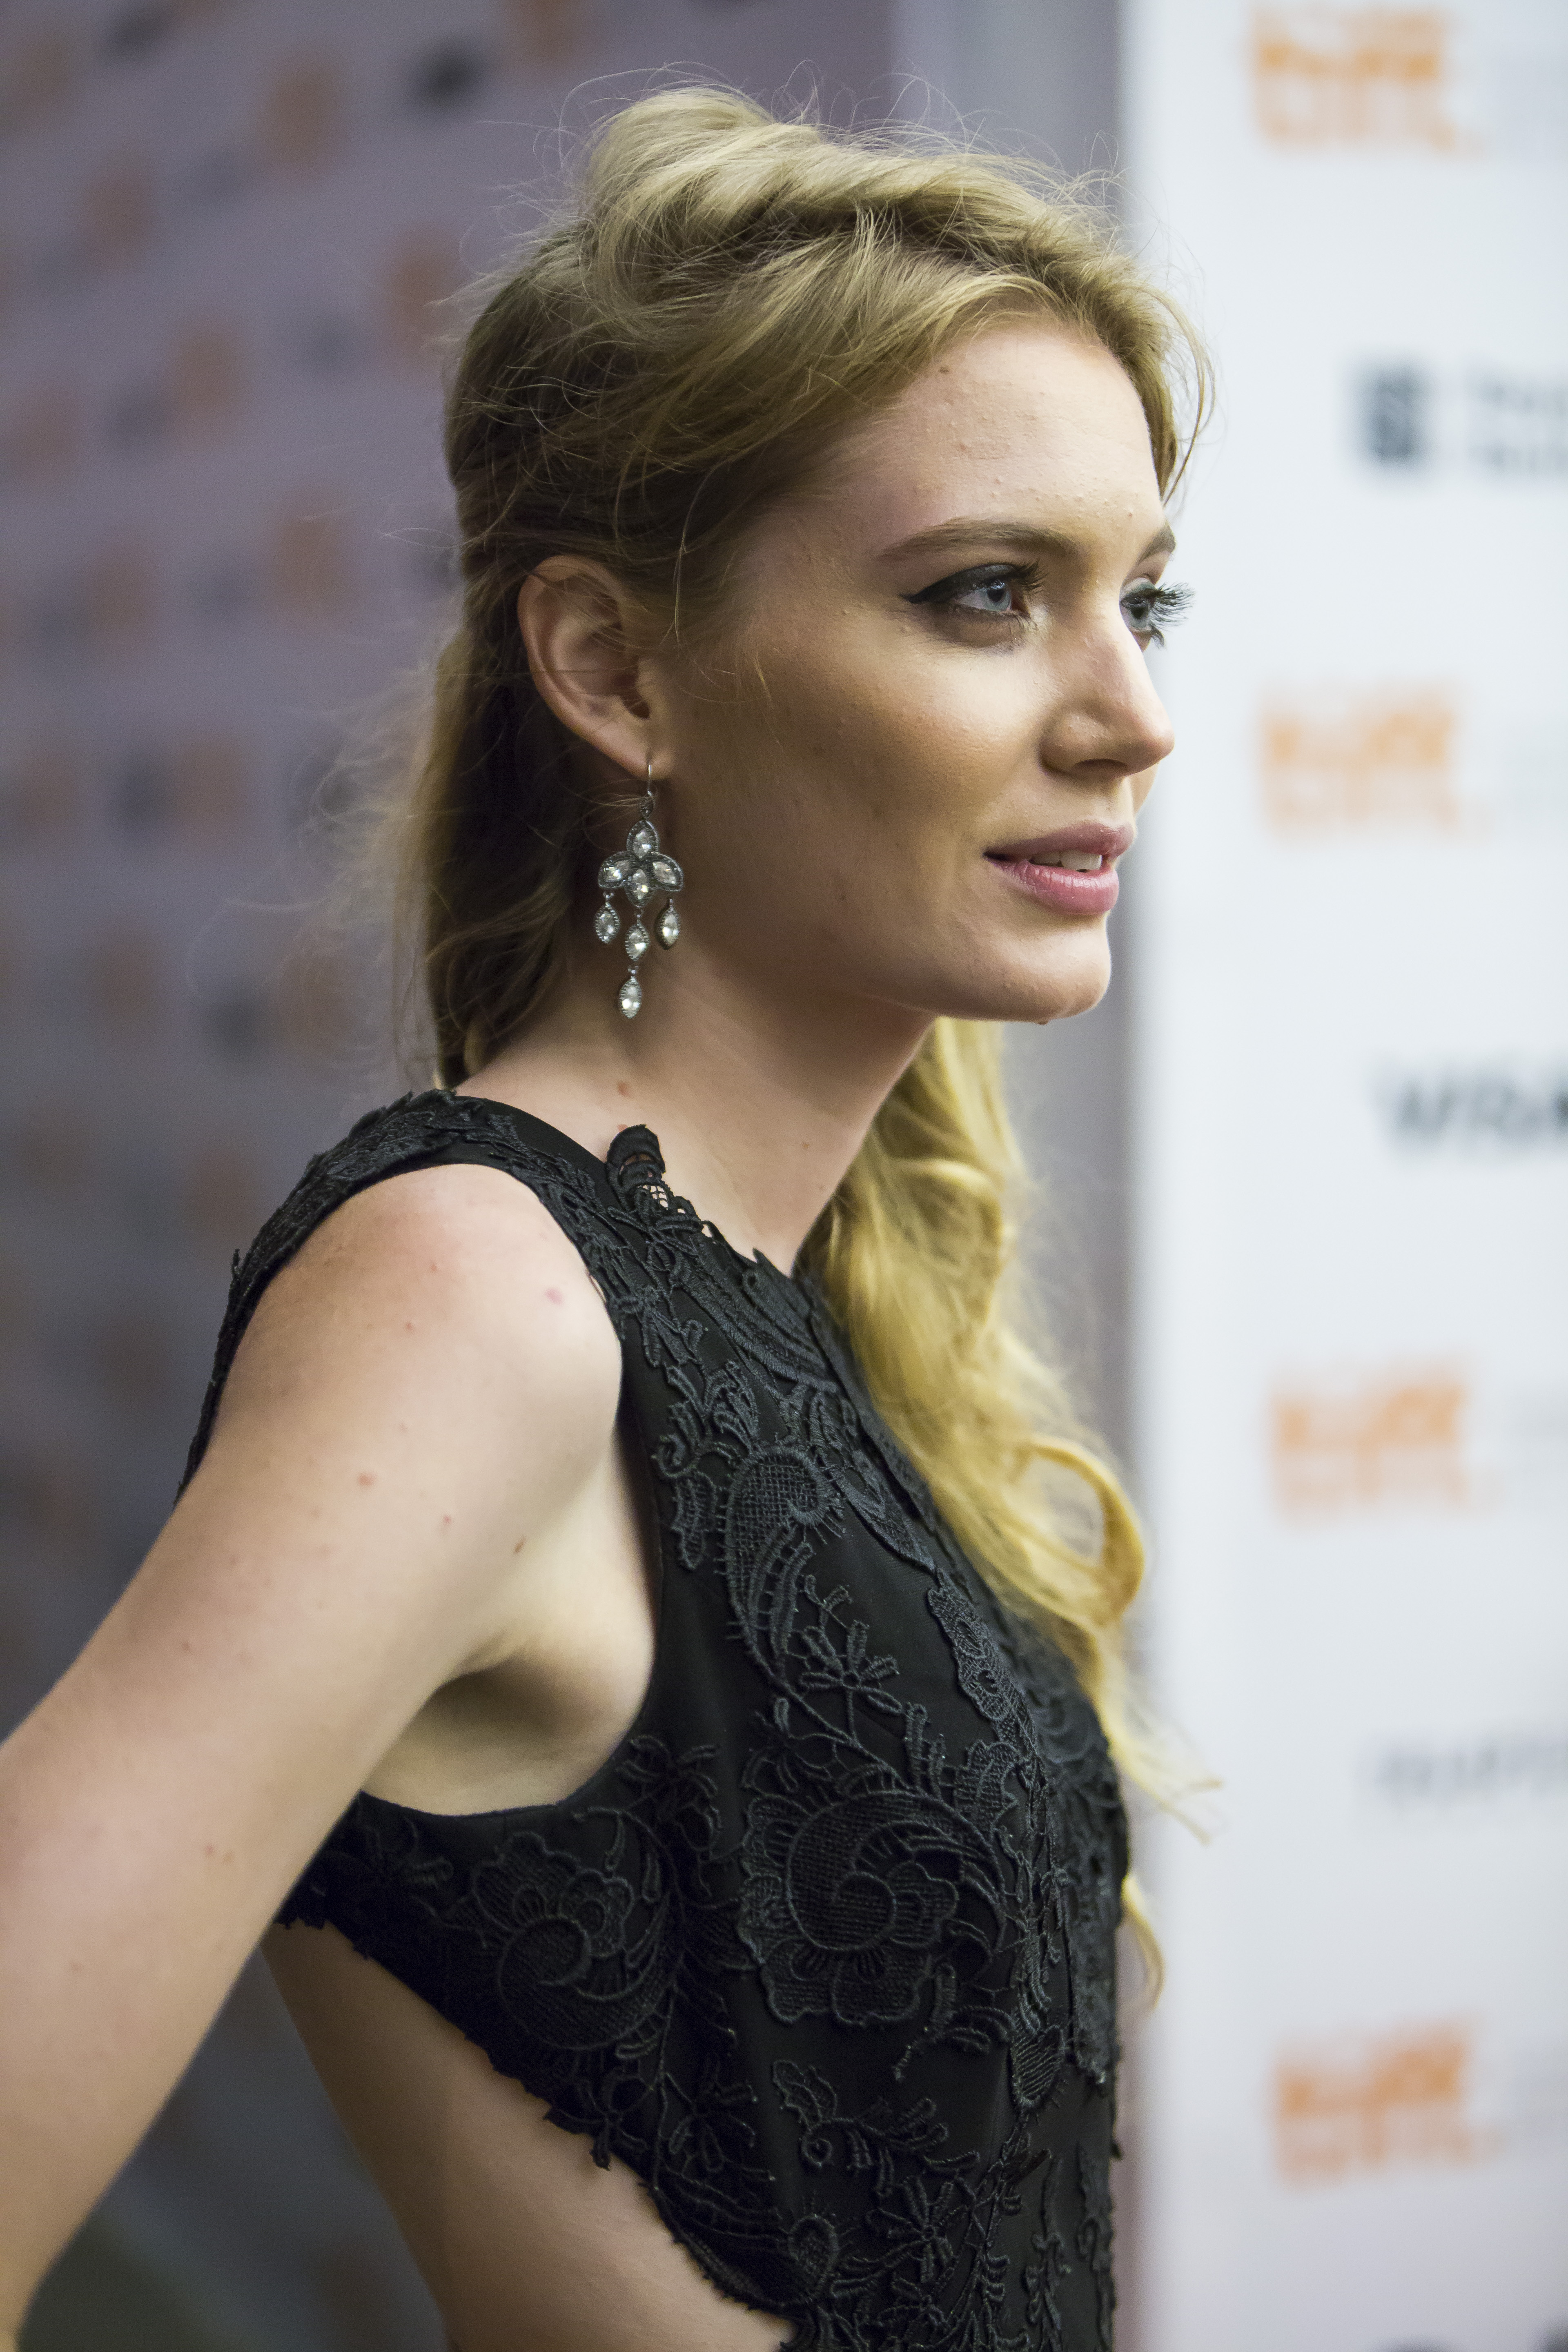 Clara Pasieka on the red carpet for the North American premiere of Maps to the Stars at TIFF